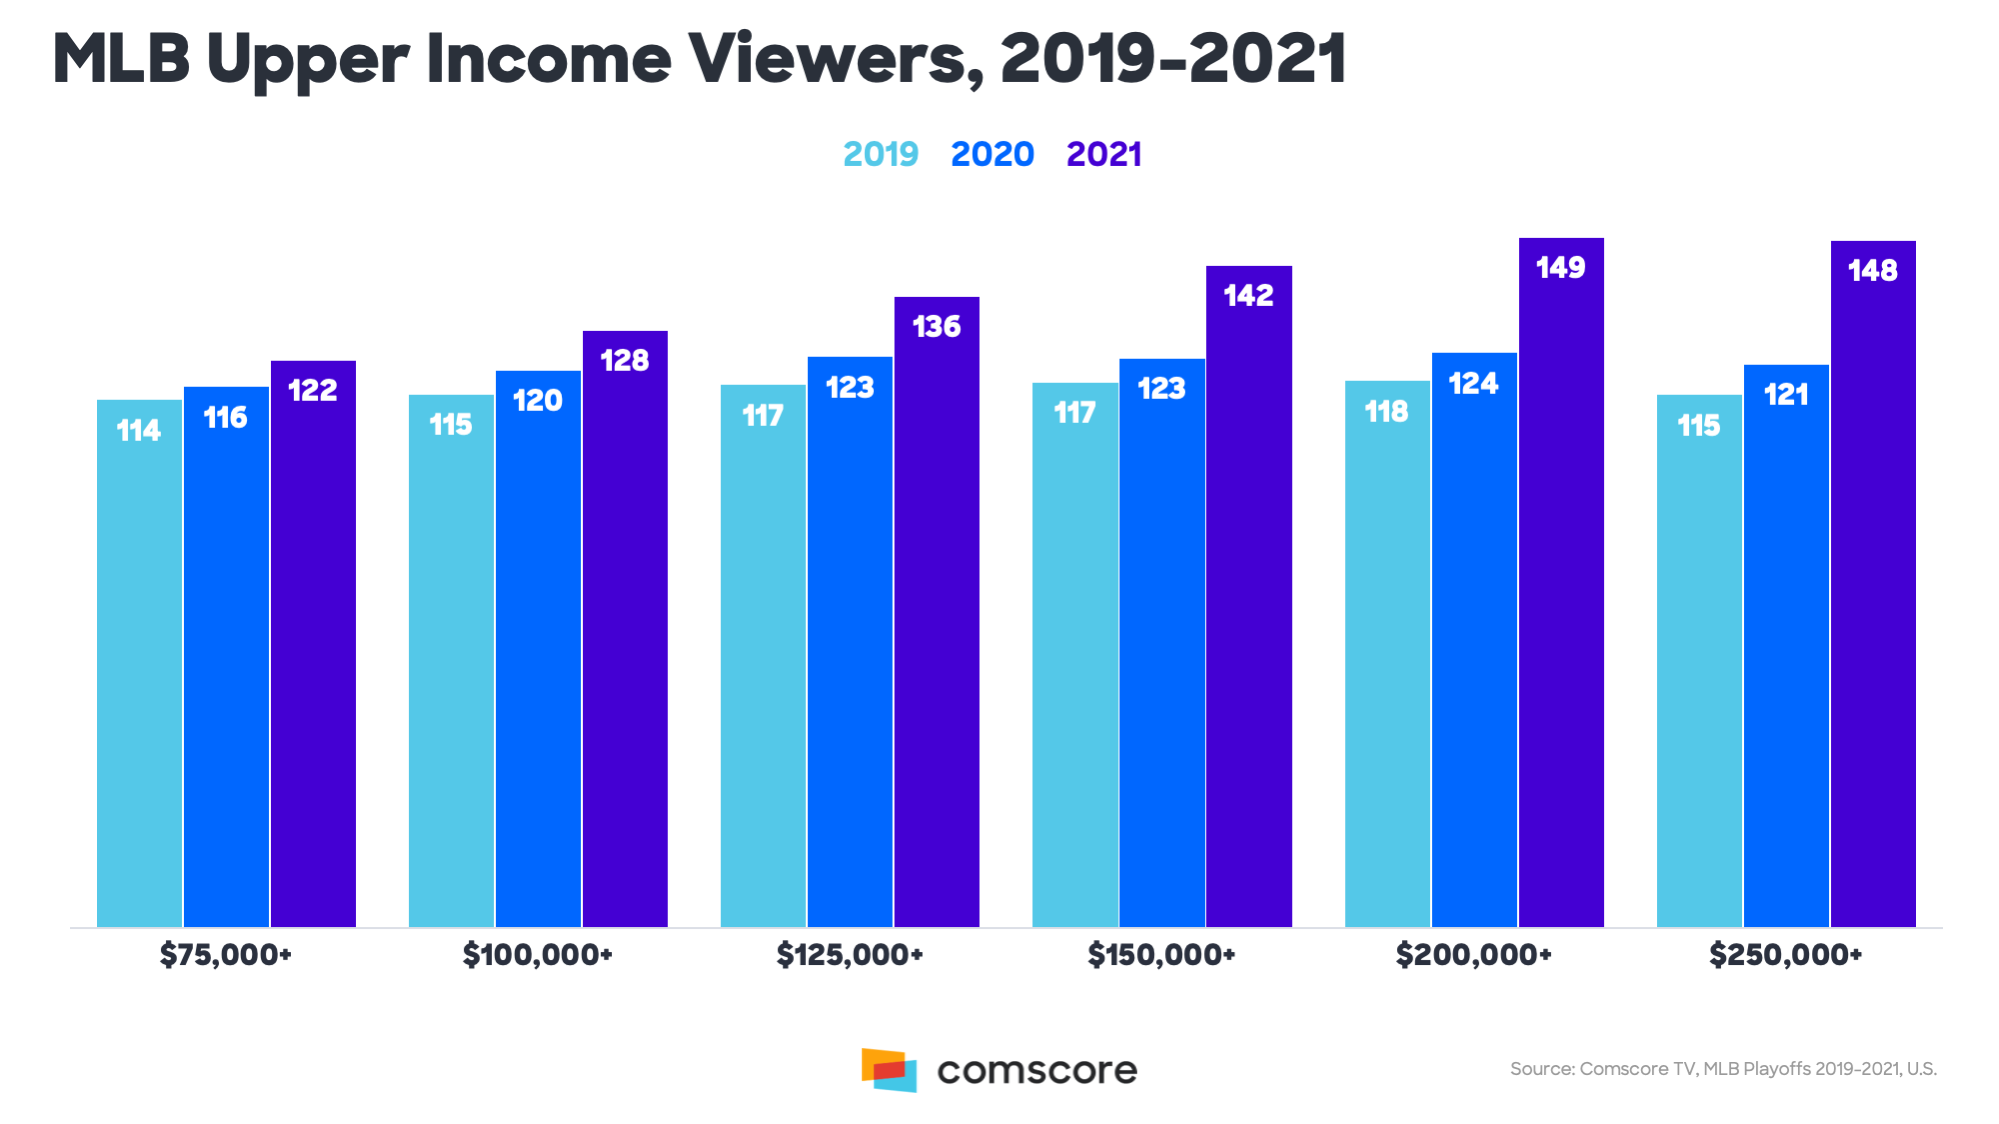 MLB Upper Income Viewers 2019-2021